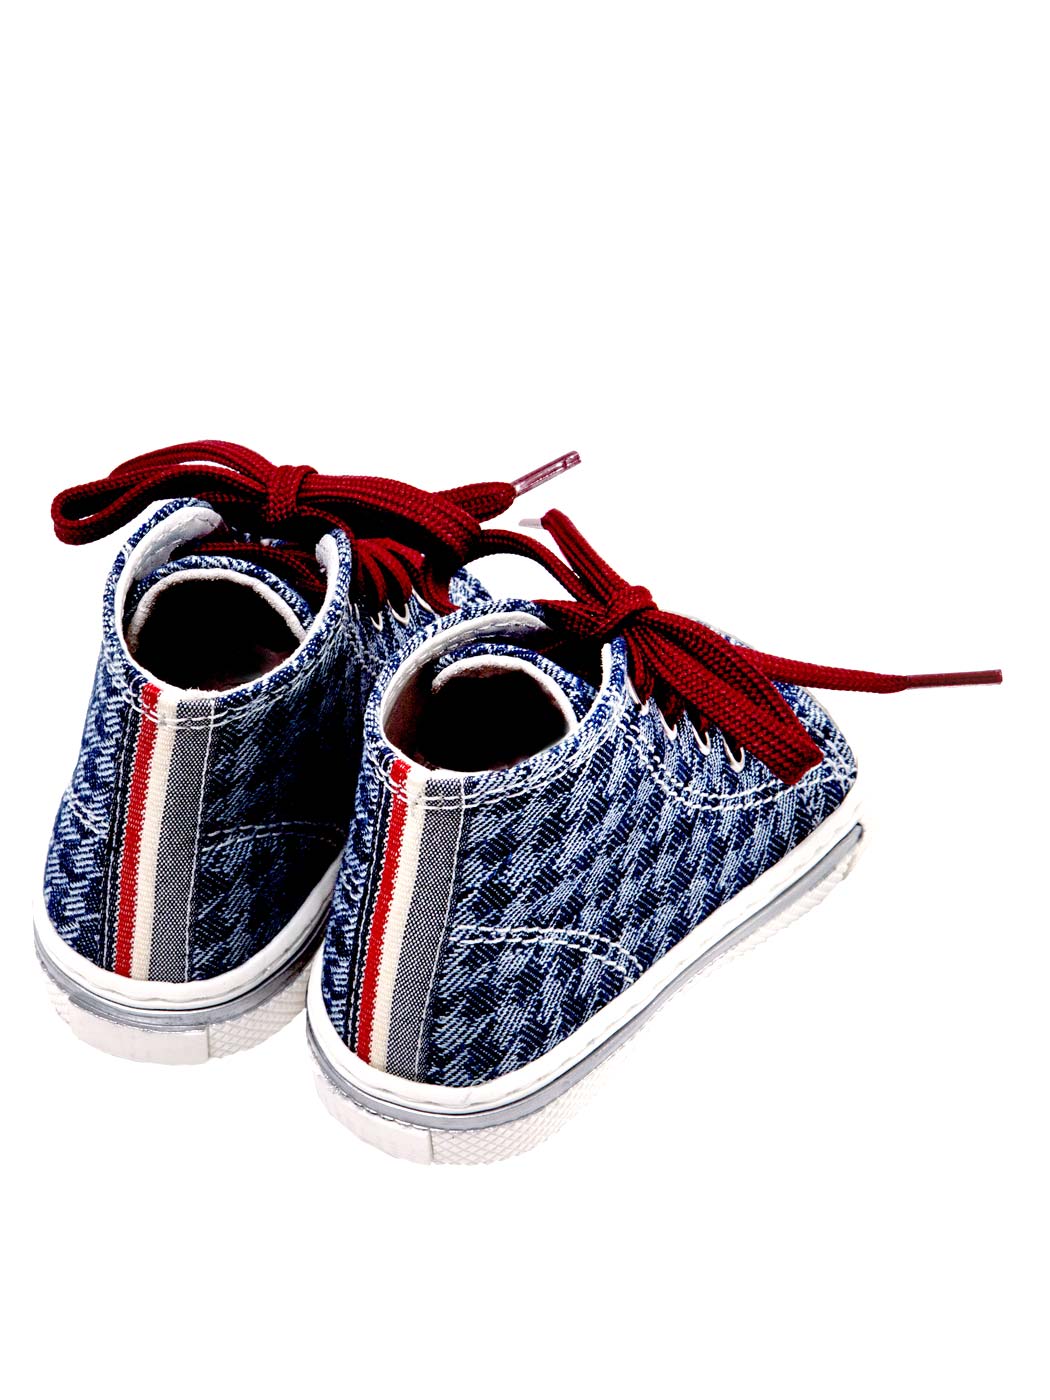 Baby bootie shoe for boy-CHRISTOFER blue